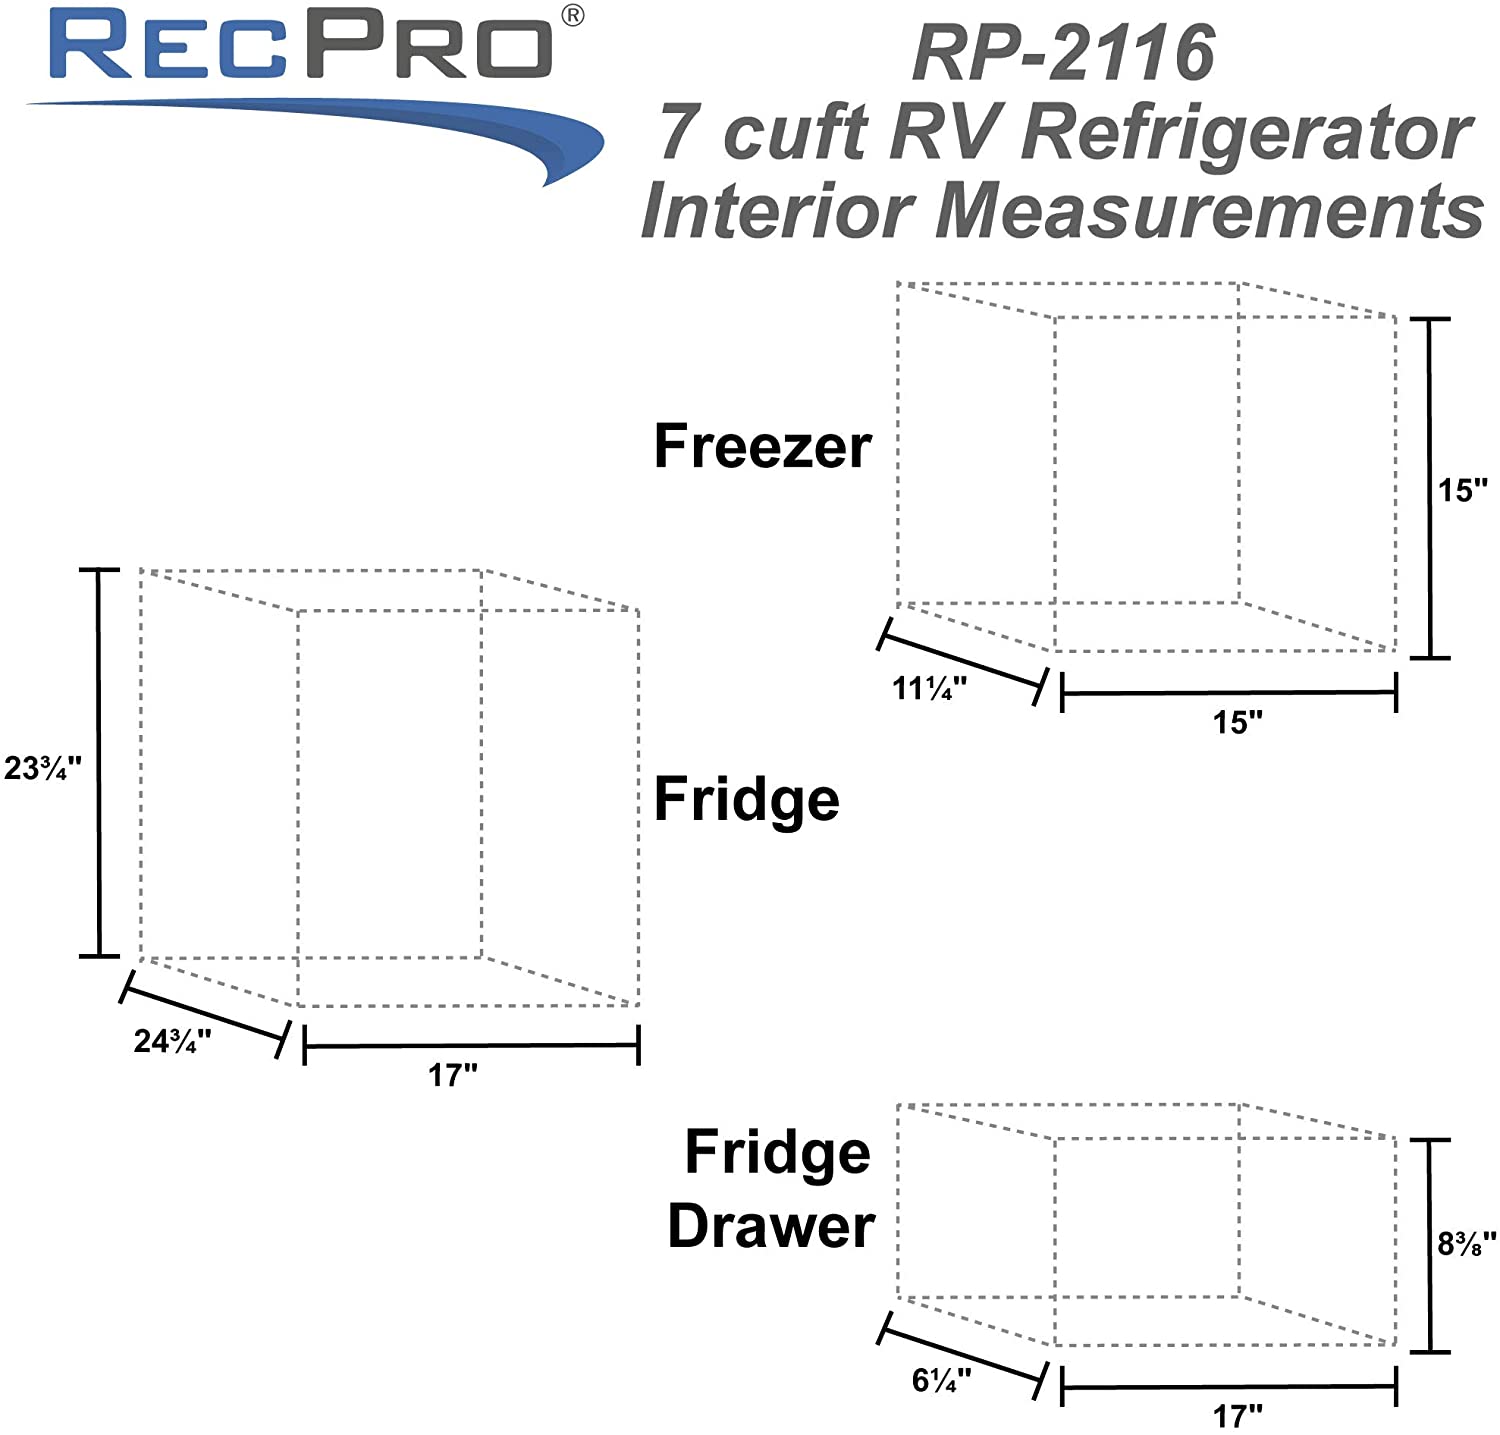 10 BEST RV REFRIGERATORS 2022 | 12V FRIDGE FOR CARAVAN, MOTORHOME, CAMPING, BOAT, TRUCK, APARTMENT- 12 V/110V/GAS LPG All In One Cooling Gear Lab: Any Refrigerators Air Conditioners Freezers Ice Makers Coolers Fans Reviewed And Compared.